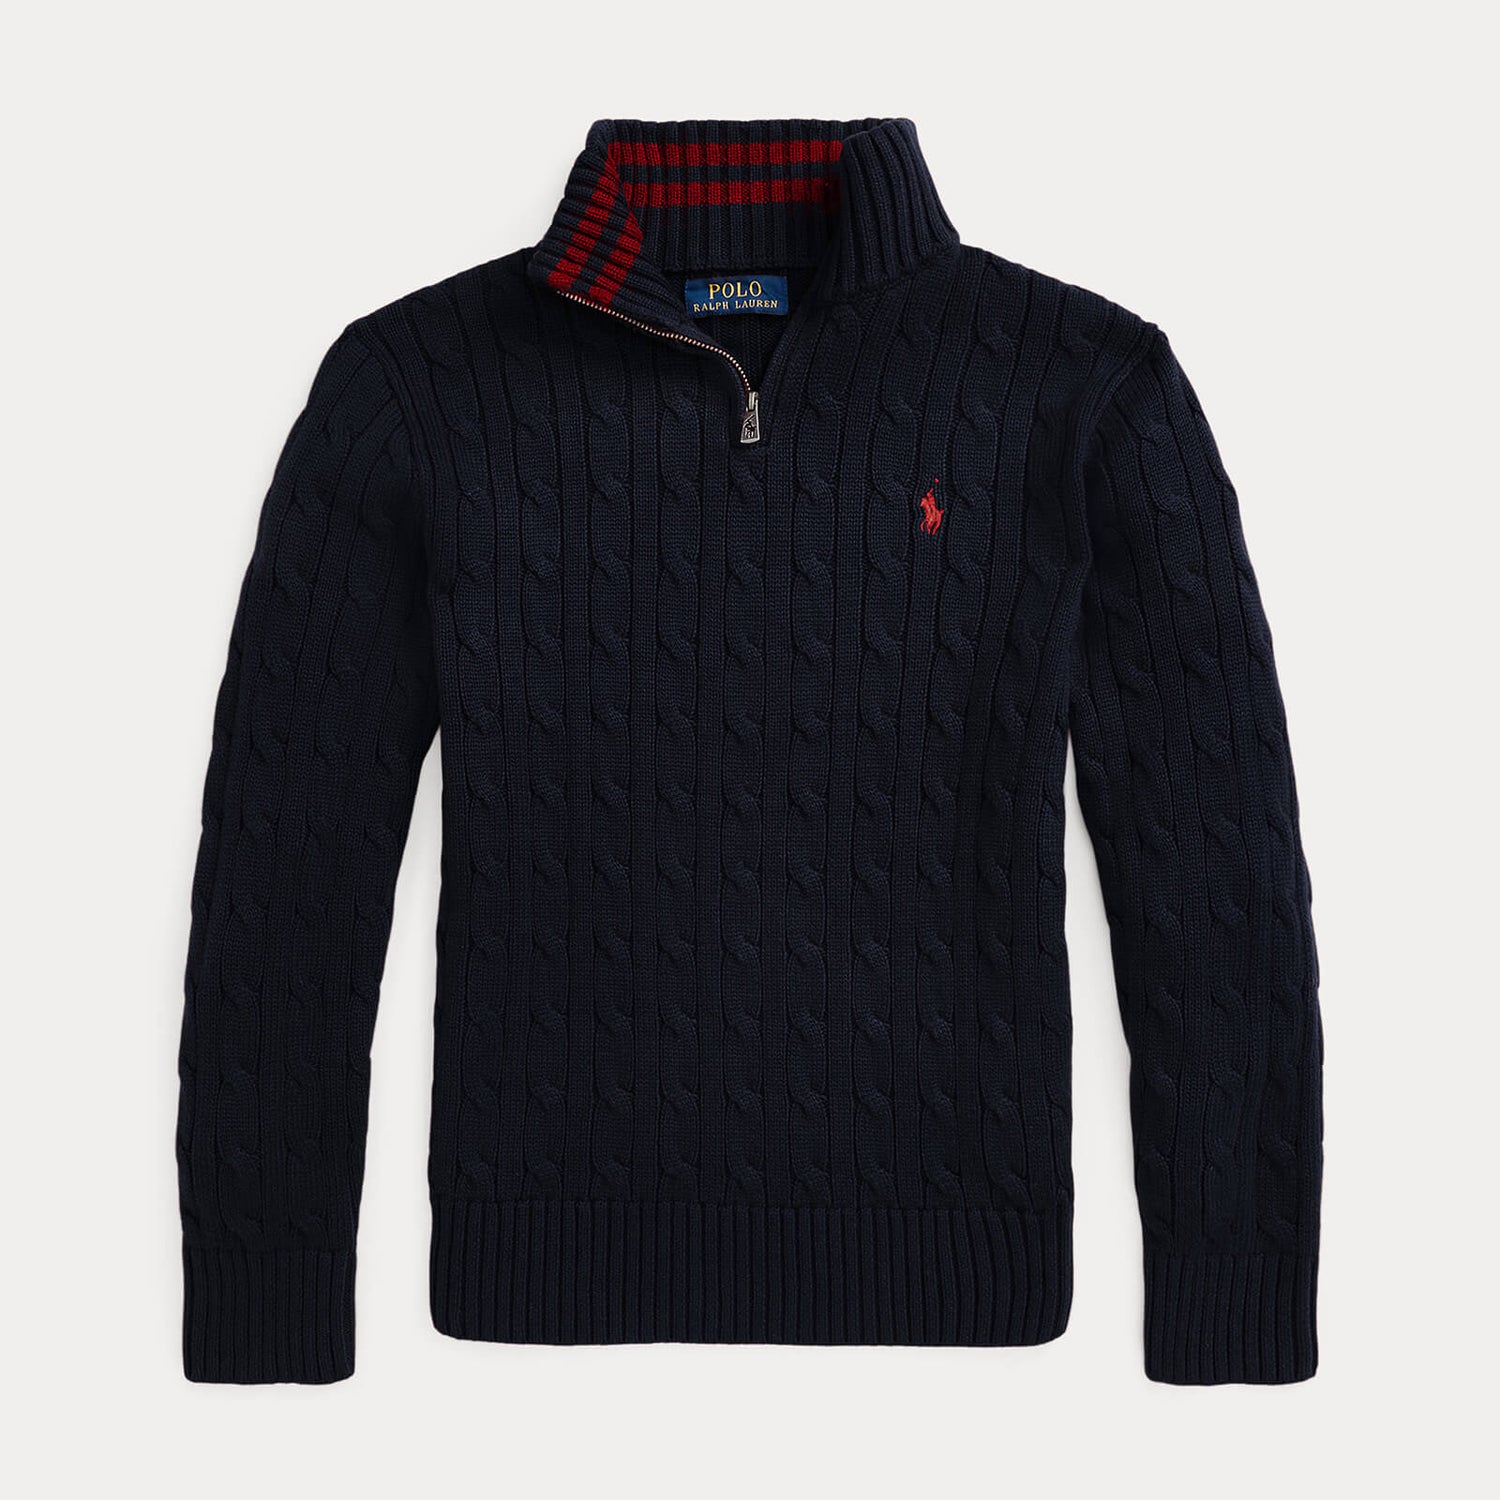 Polo Ralph Lauren Pullover Cable Knit Sweater - 2 Years